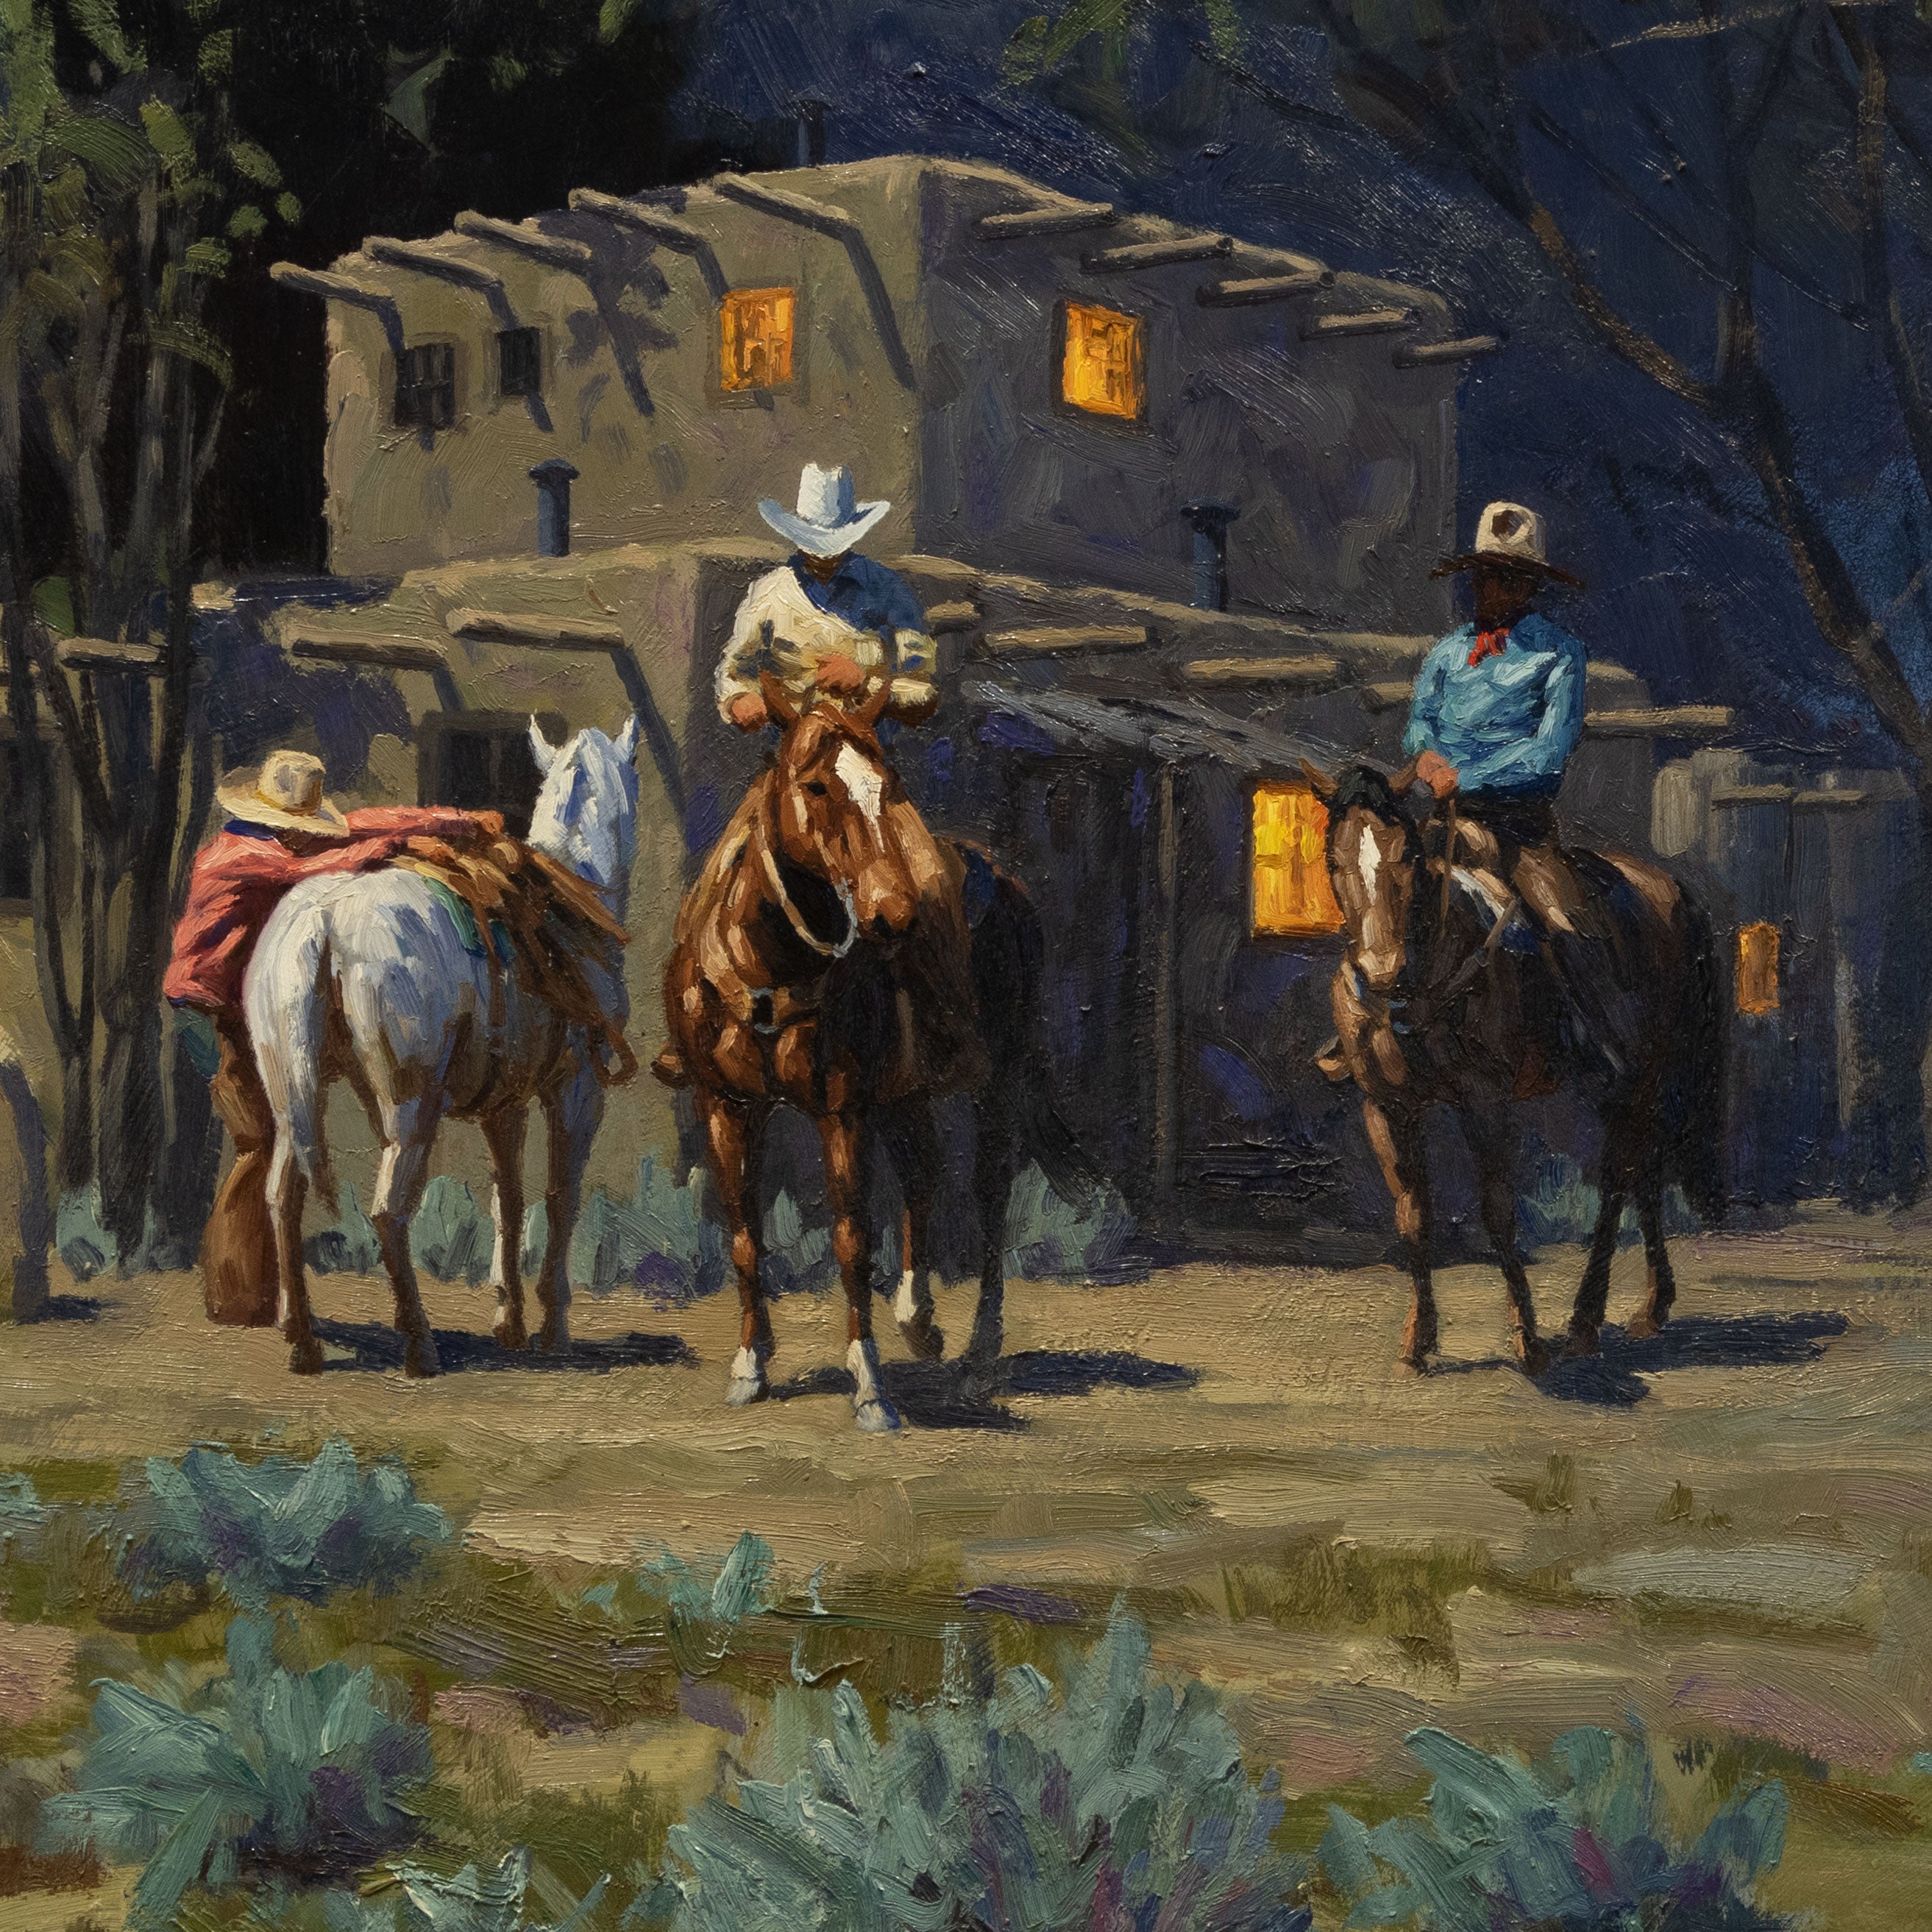 In Old Santa Fe by Martin Weekly